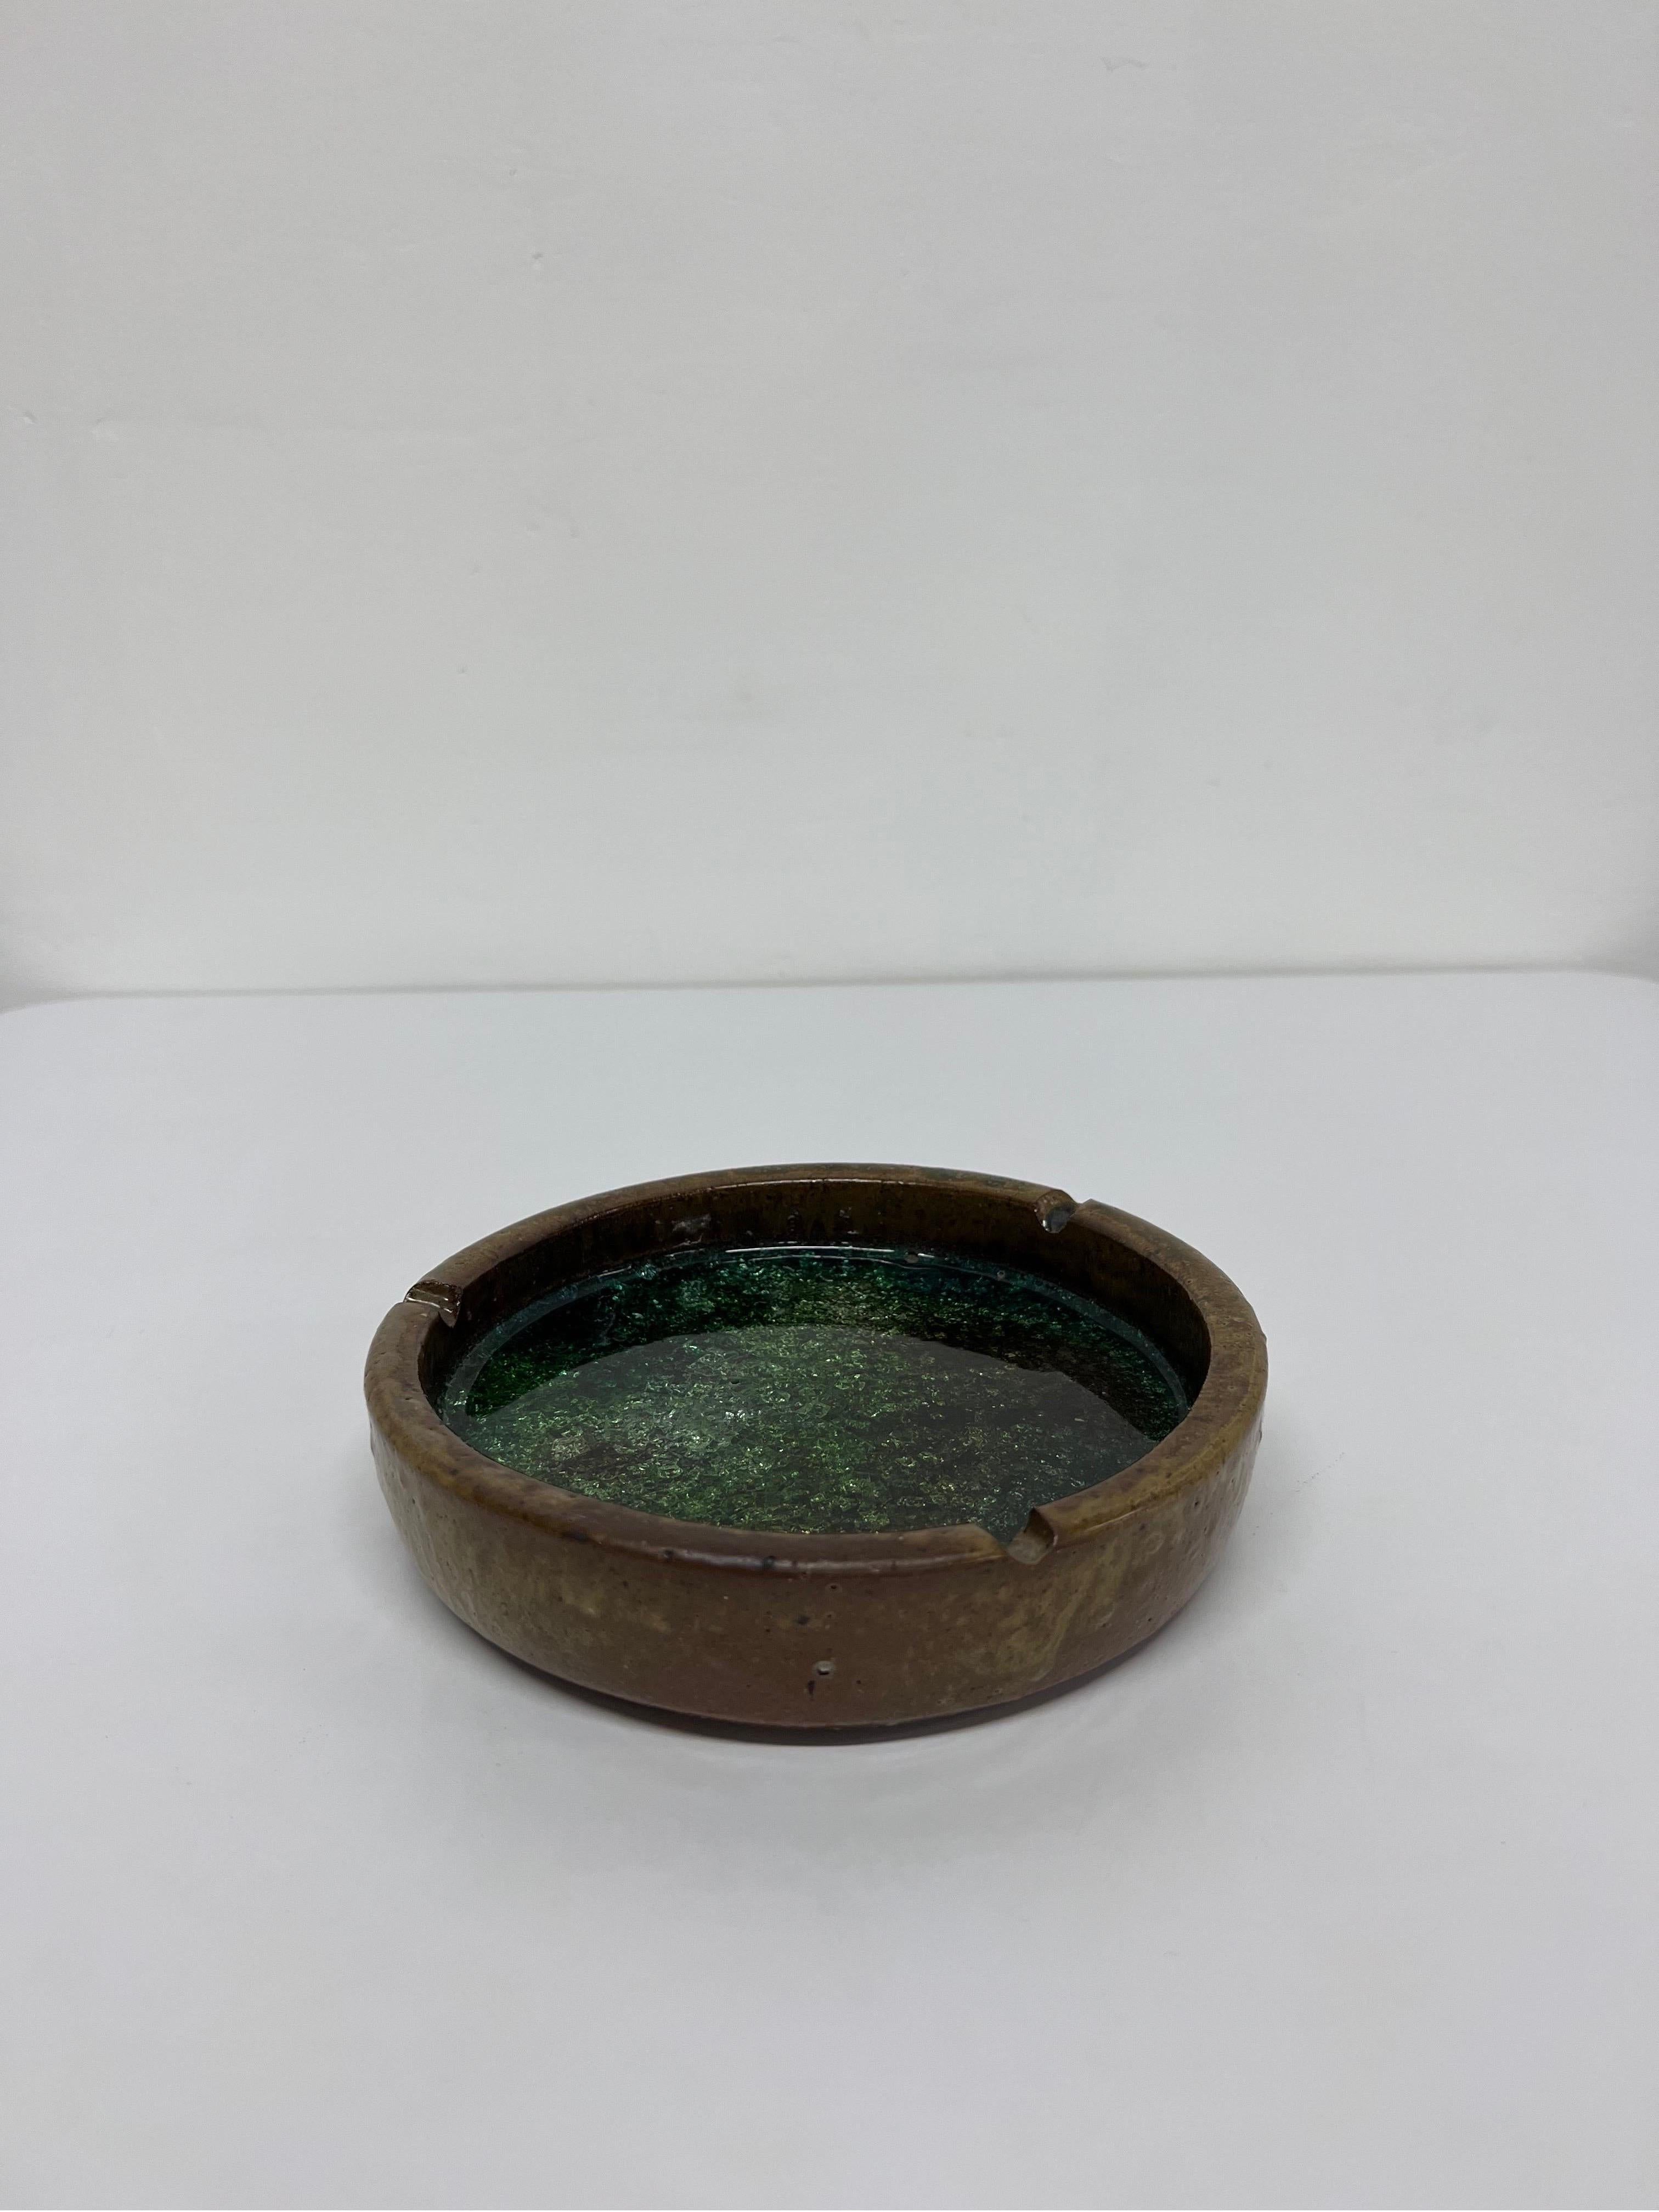 Mid-century Brazilian modern ceramic ashtray or catchall with crackled green glass and cork bottom, 1950s.